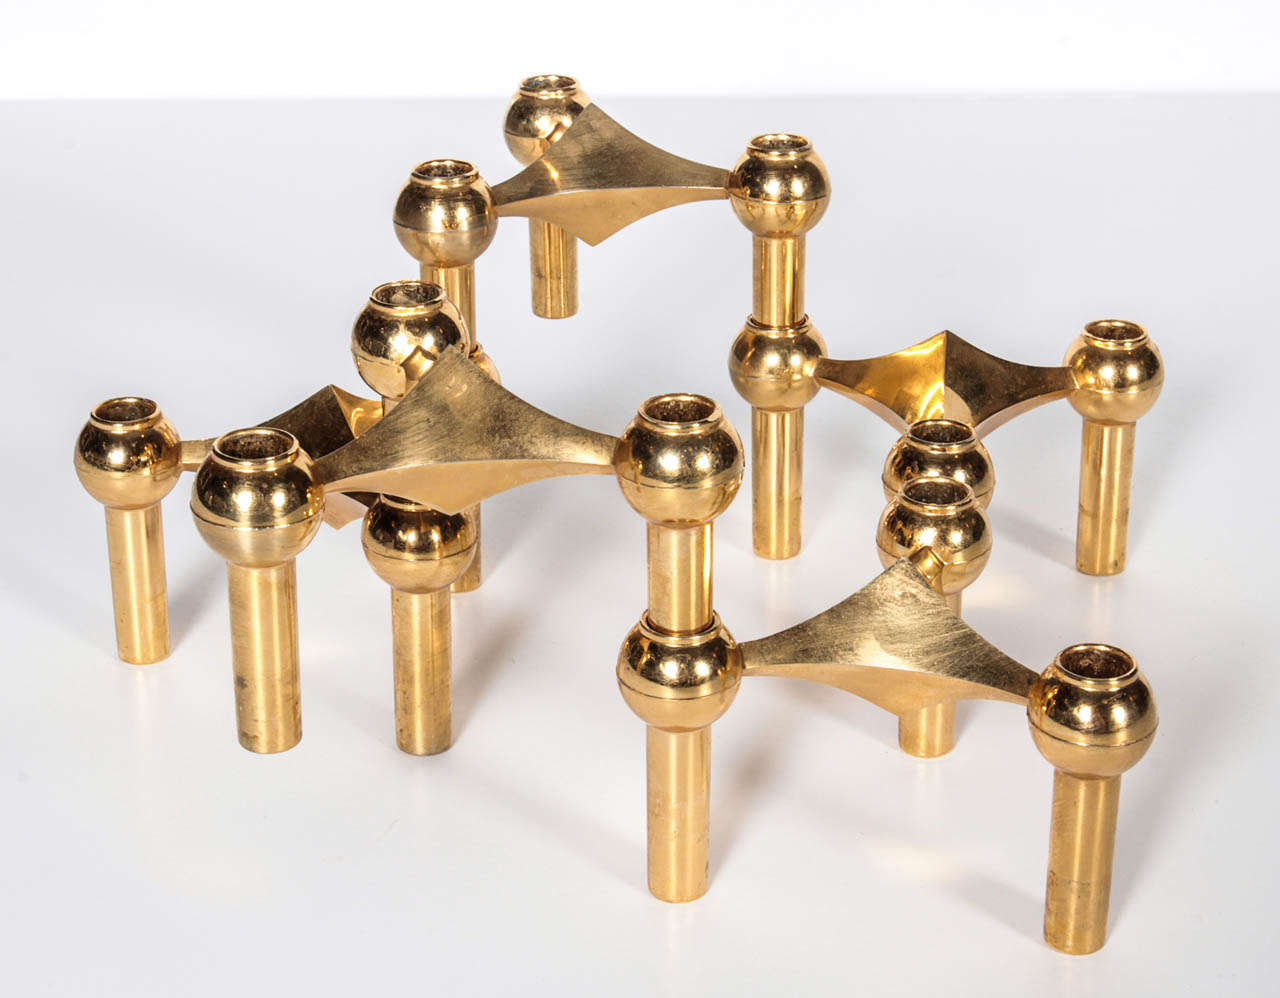 Modular gold-plated candelabrae signed by Cesar Stoffi for Nagel Germany. Each individual candle holder is 4